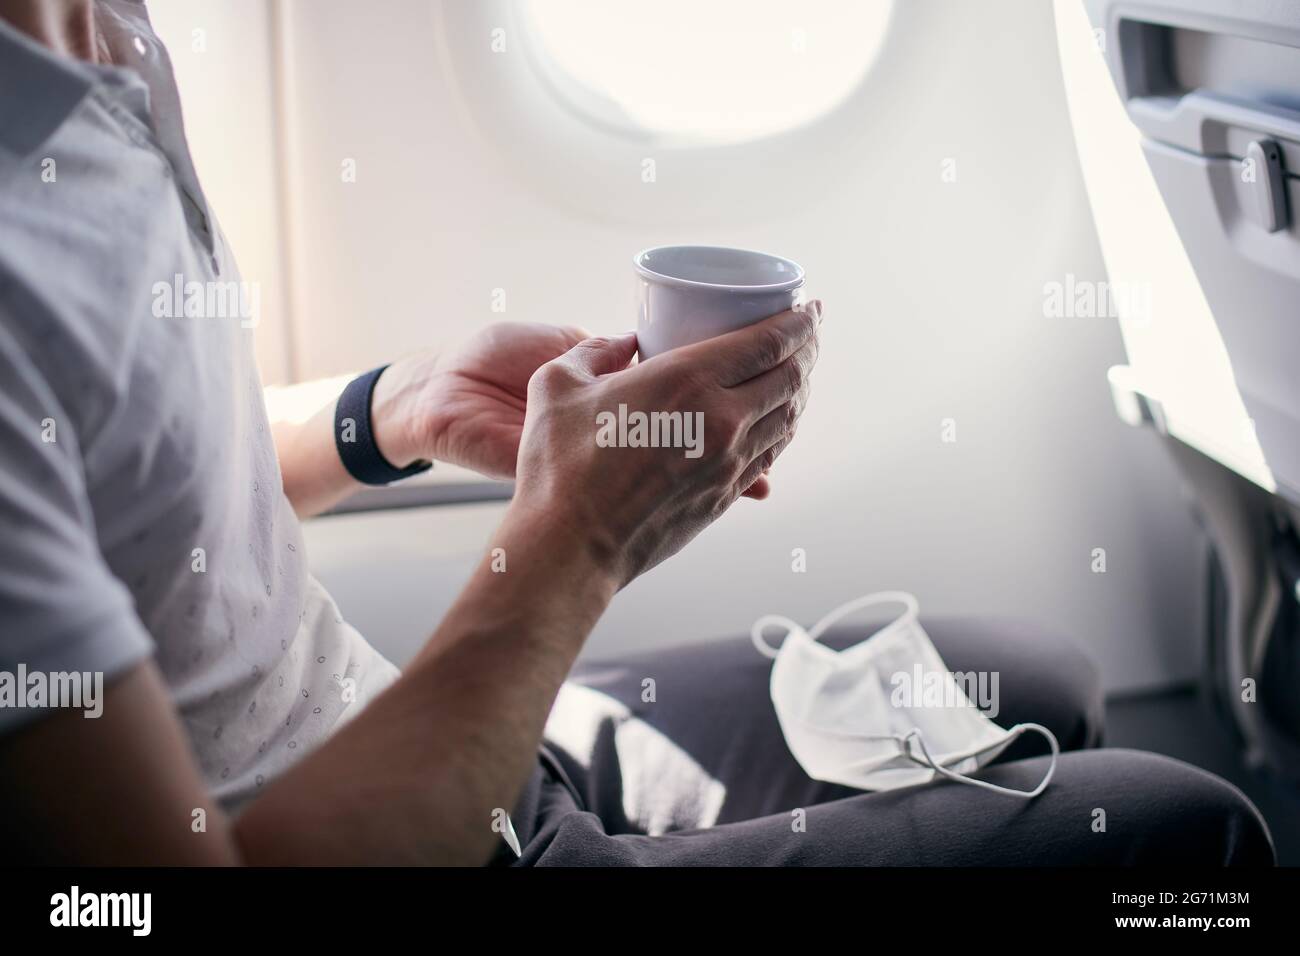 Passenger with face mask drinking coffee in airplane. Themes traveling during pandemic covid-19. Stock Photo